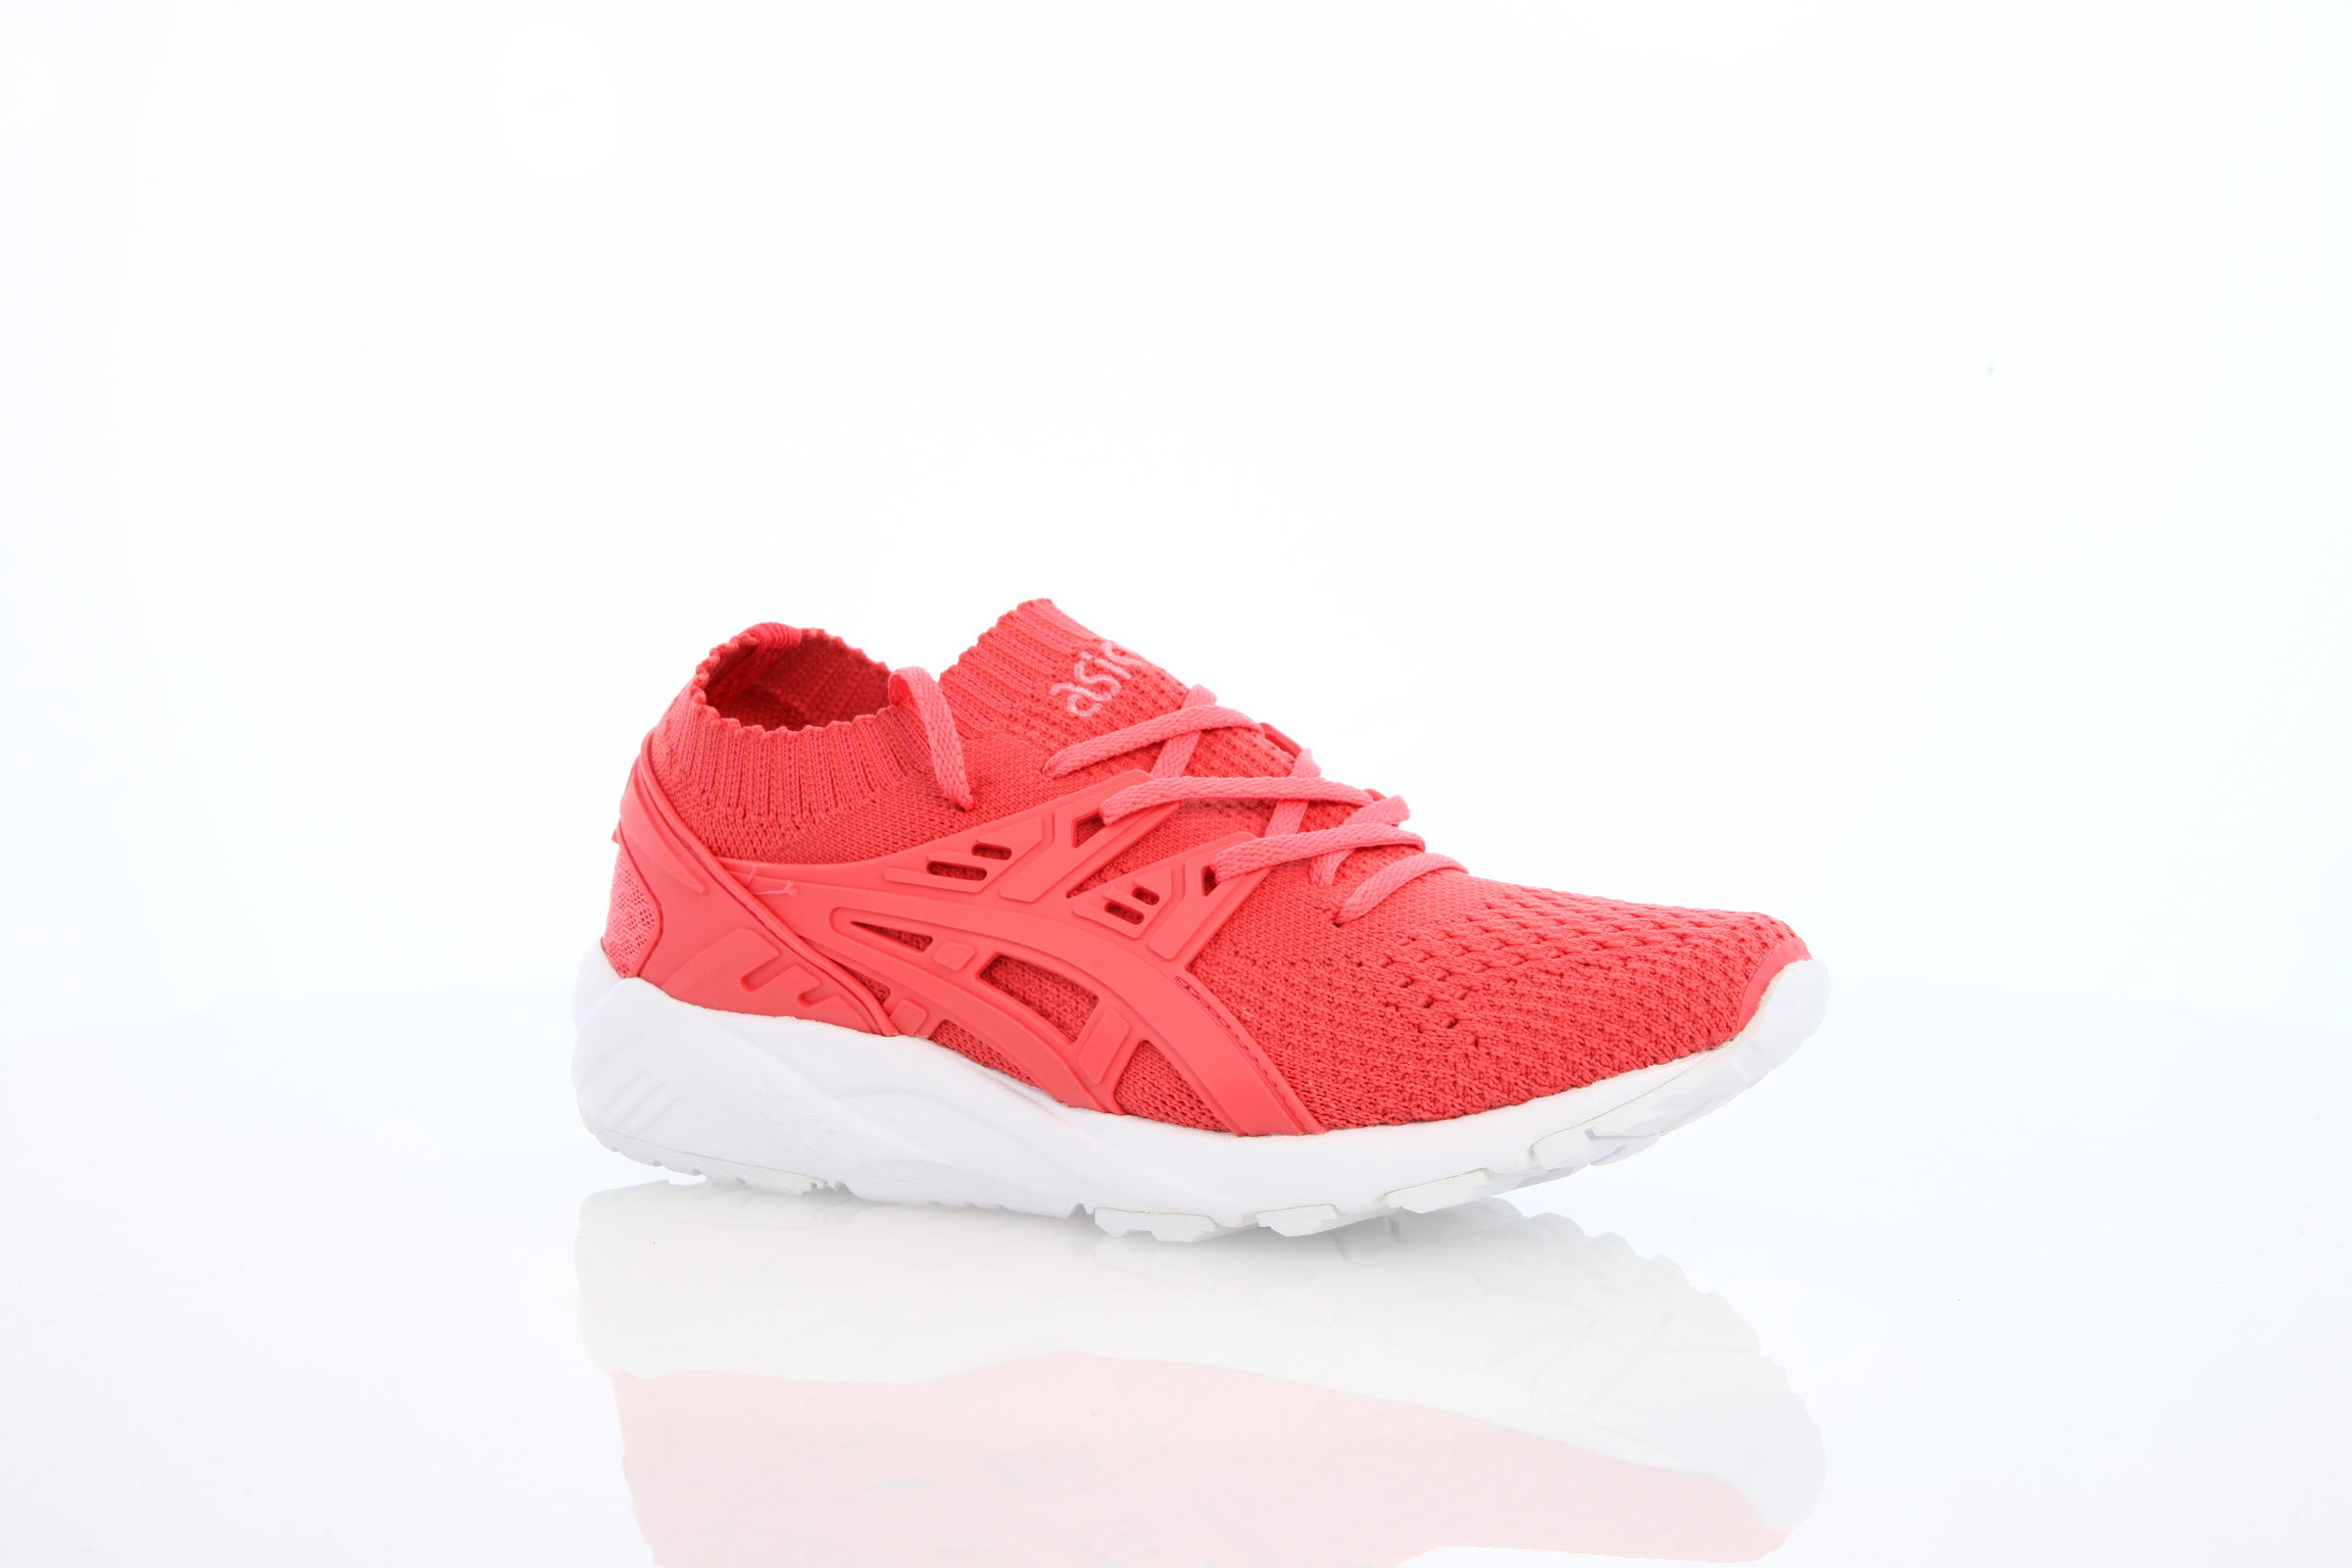 Asics Gel-Kayano Trainer One Piece Knit Pack "Peach"